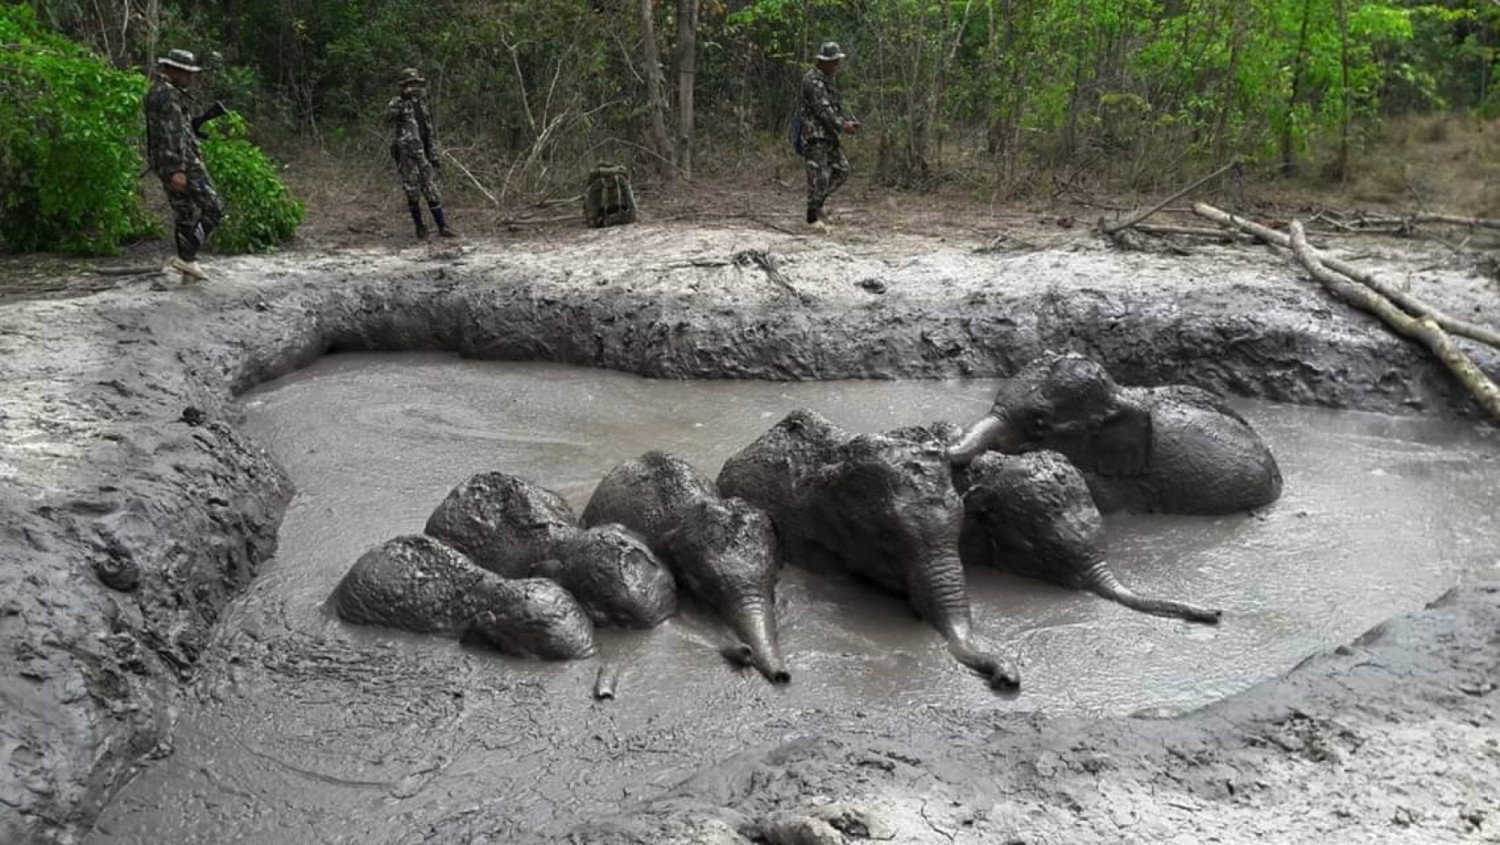 Six Baby Elephants Rescued From Mud Pond in Thailand